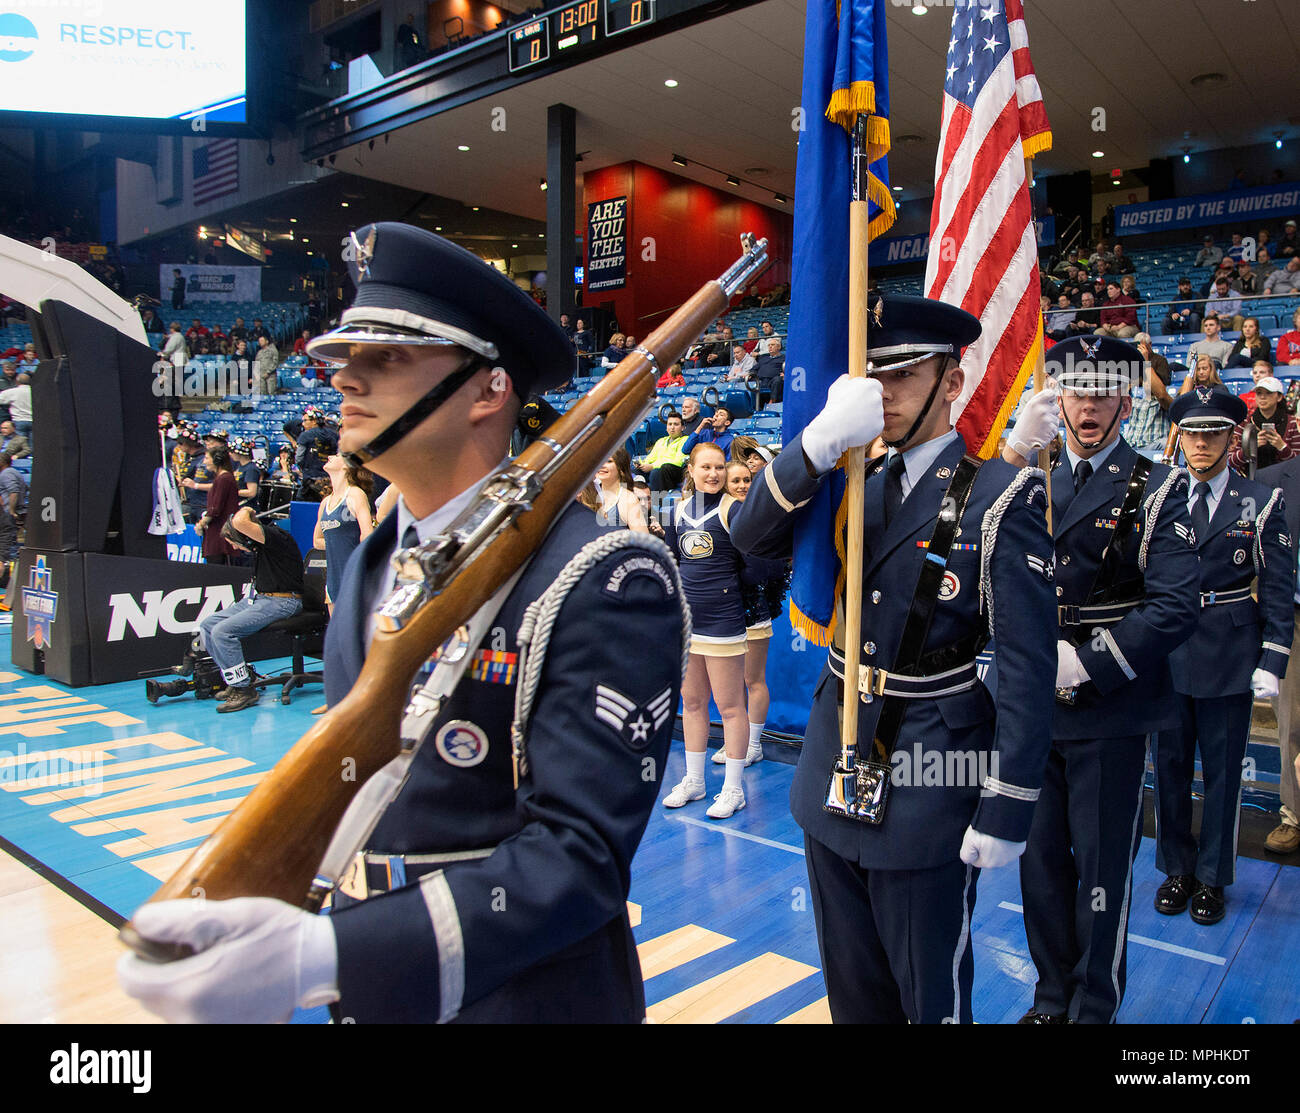 Senior Airman Nicholas Cicone, Wright-Patterson Air Force Base Honor Guard member, gives the command to march as the honor guard enters the court prior to the NCAA First Four game between the University of California Davis and North Carolina Central University in the University of Dayton Arena, March 15, 2017. Airmen from Wright-Patterson Air Force Base took part in the pregame ceremonies including the unfurling of a large American flag and new Airman joined the Air Force through the delayed entry program by taking the oath of enlistment during halftime. (U.S. Air Force photo by R.J. Oriez) Stock Photo